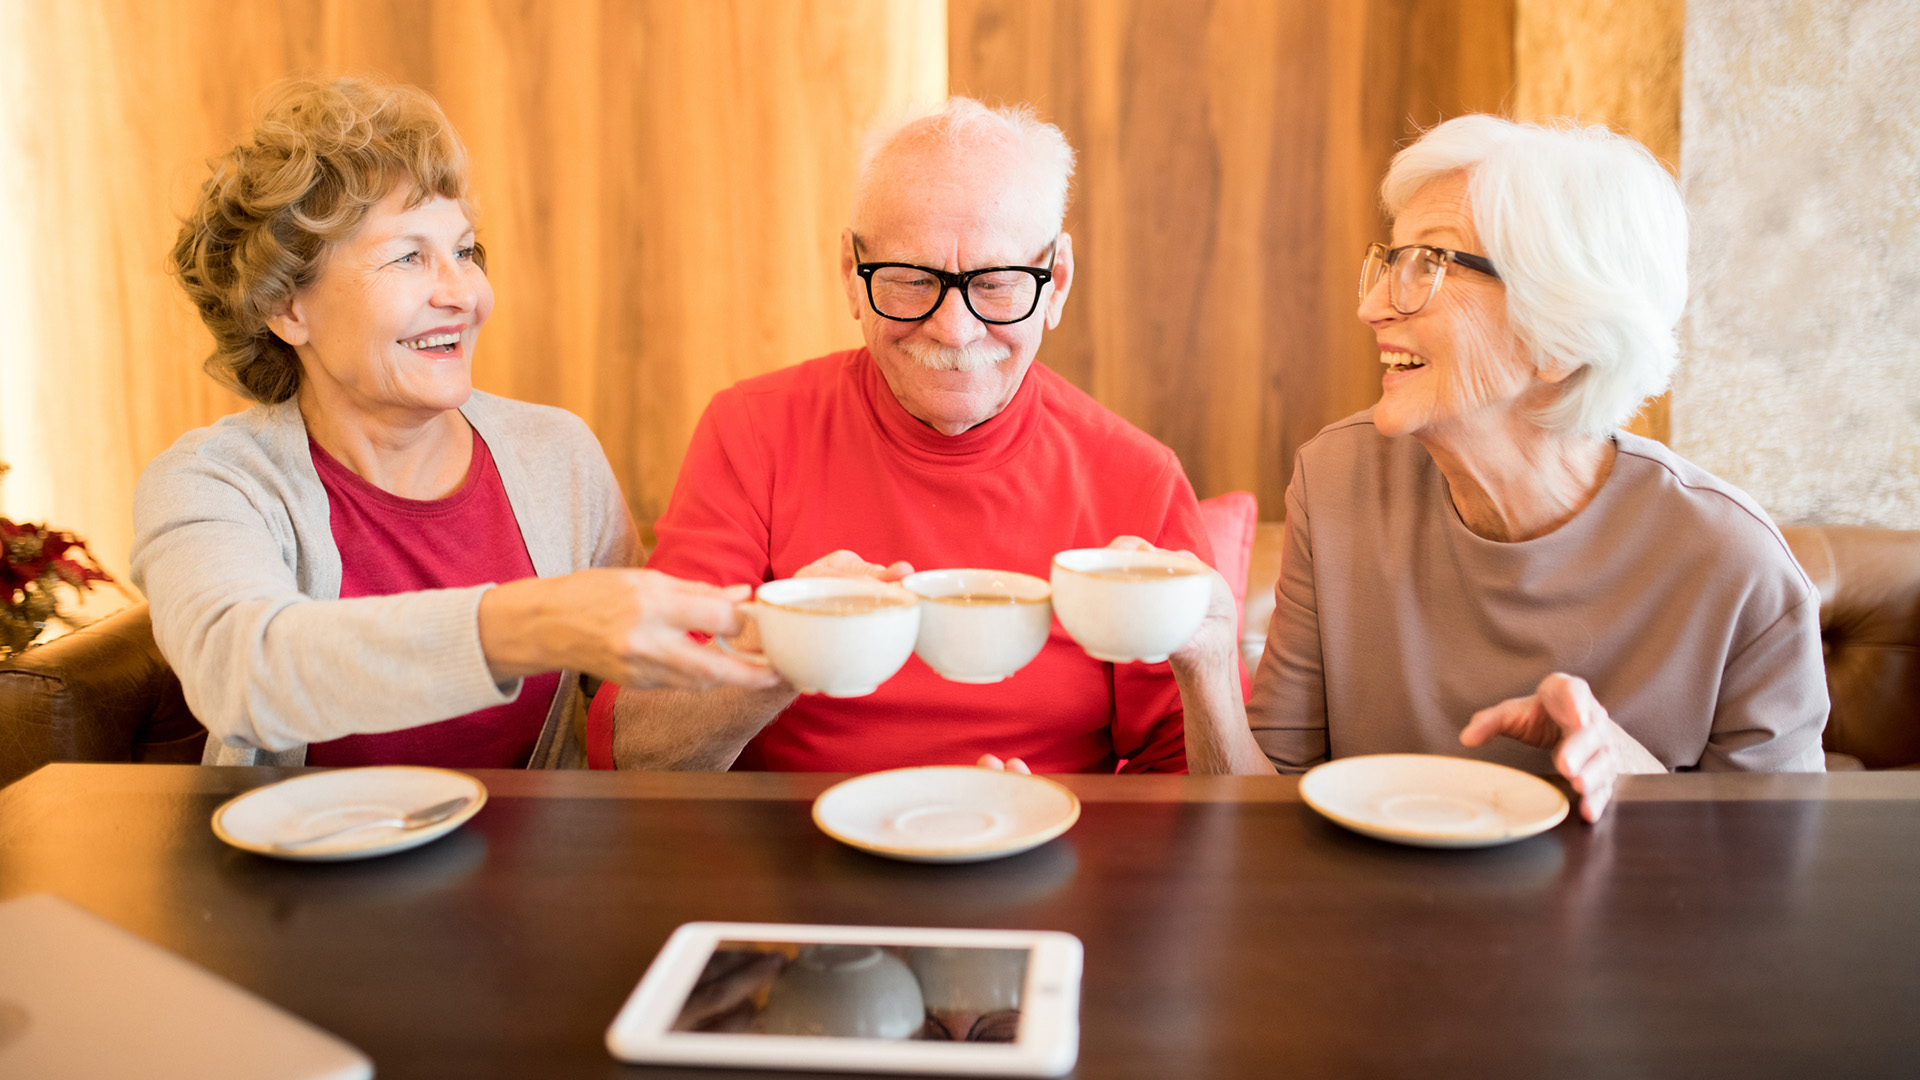 Featured image for “8 Surefire Ways to Make Friends in Senior Living”